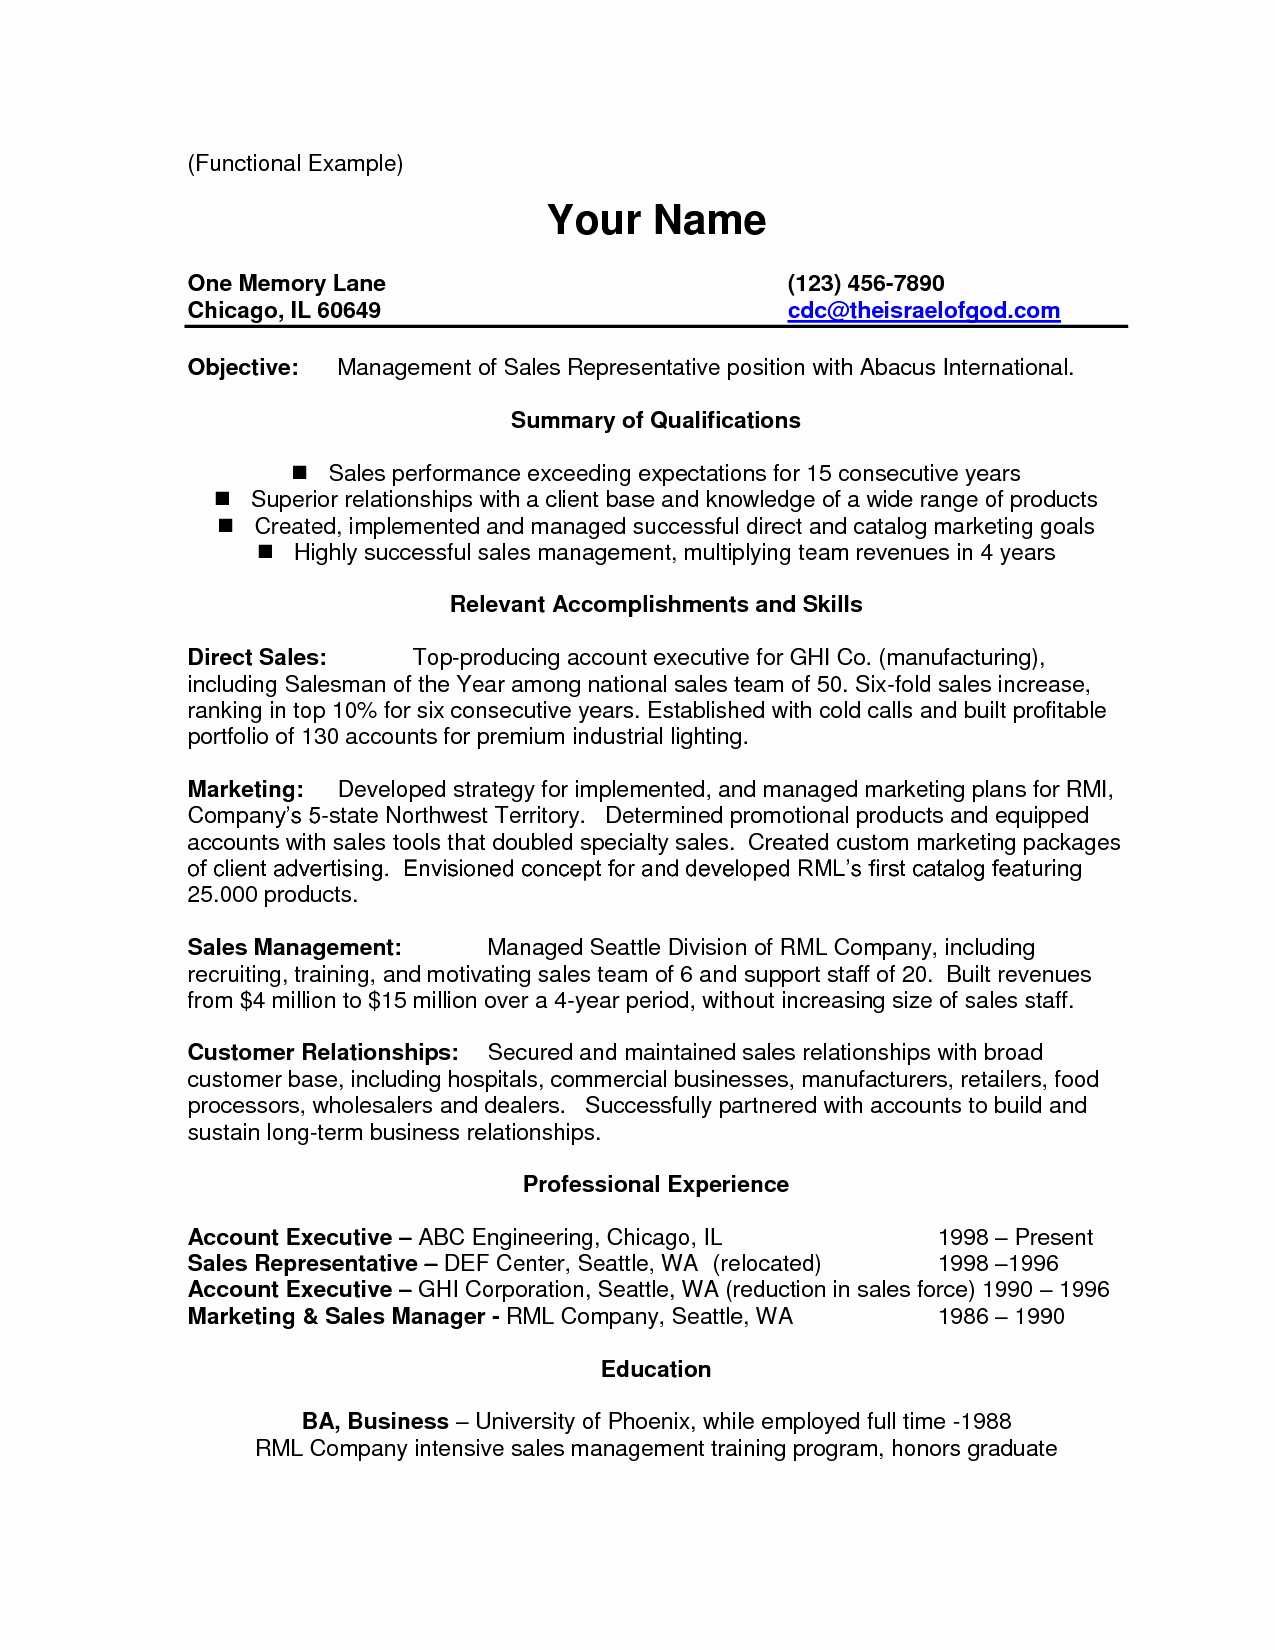 sample resume for account executive position